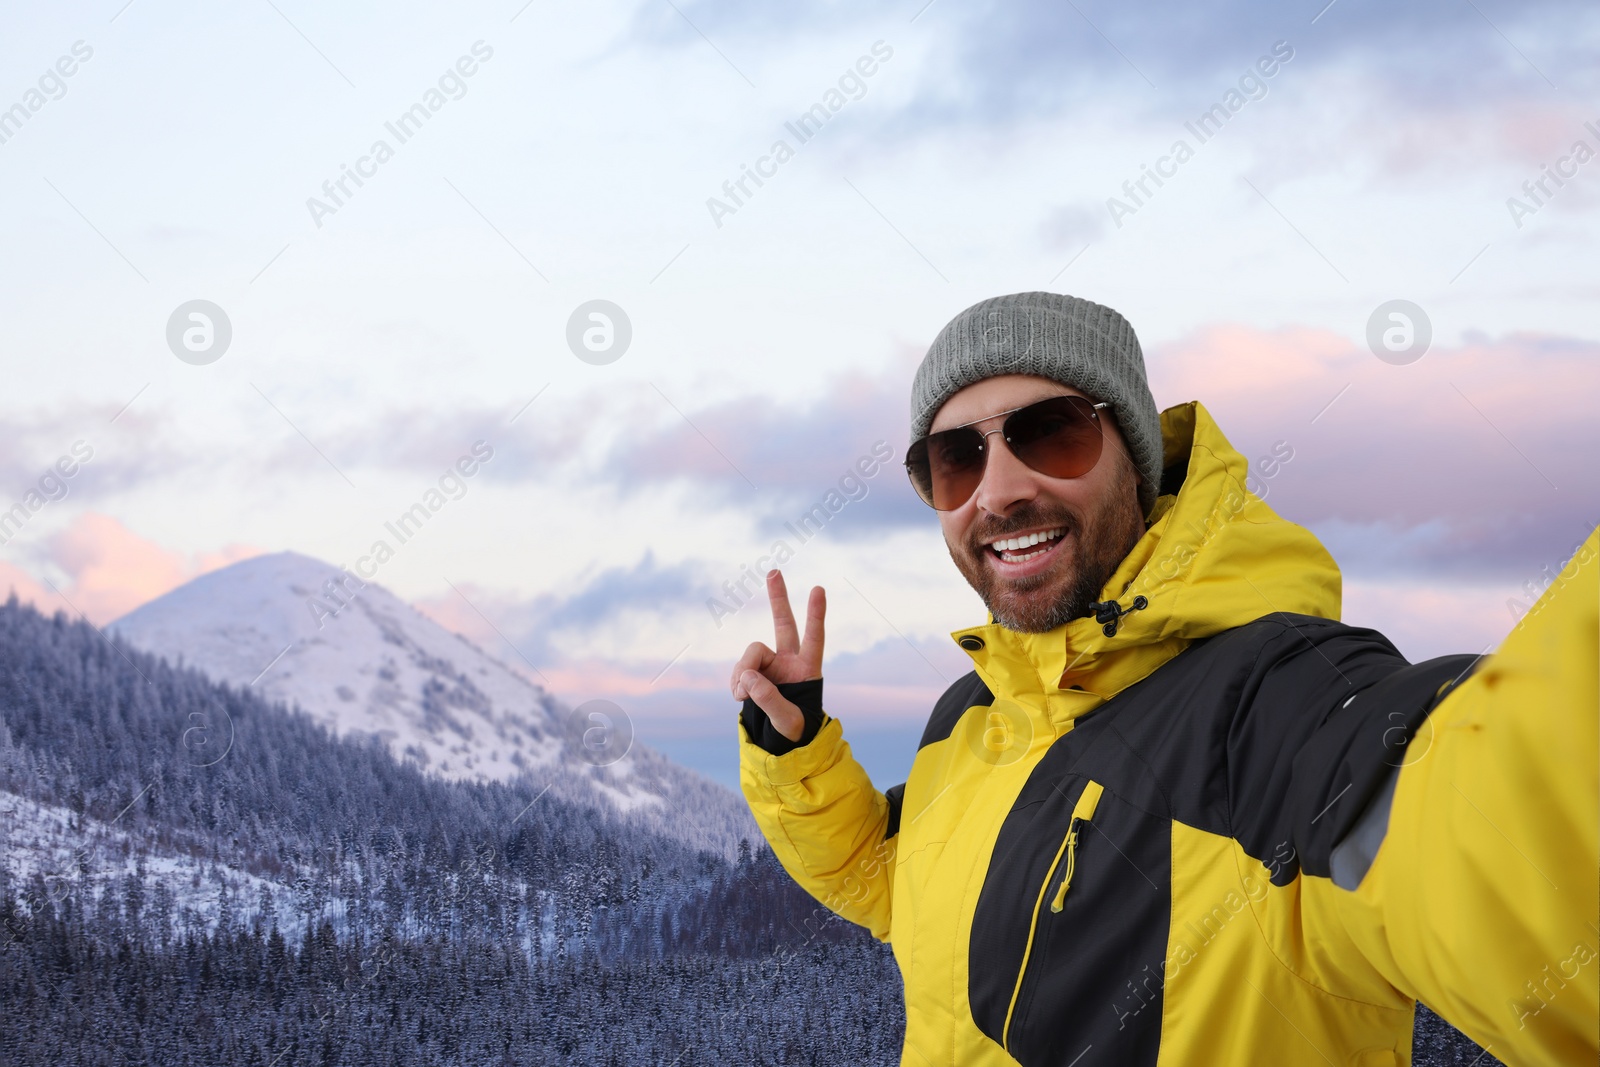 Image of Smiling man in sunglasses taking selfie and showing peace sign in mountains